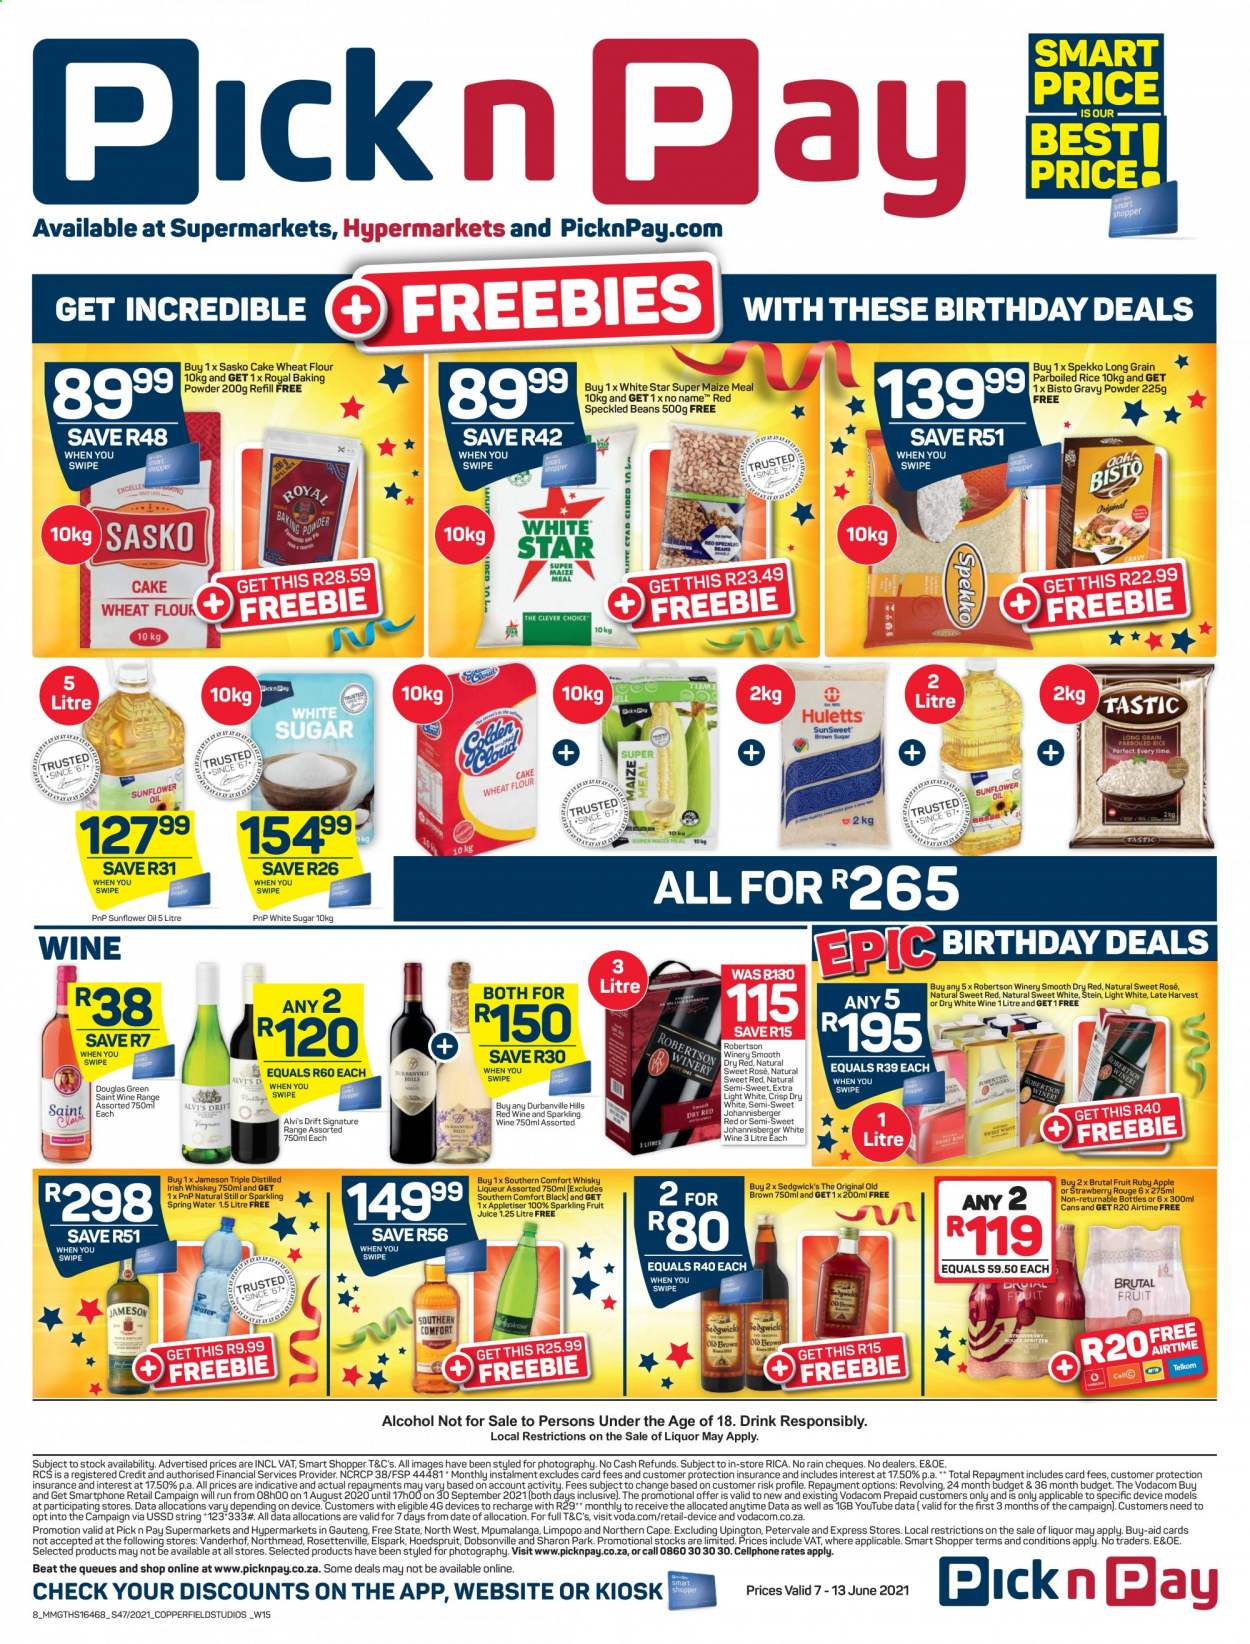 Pick n Pay specials - 06.07.2021 - 06.13.2021. 